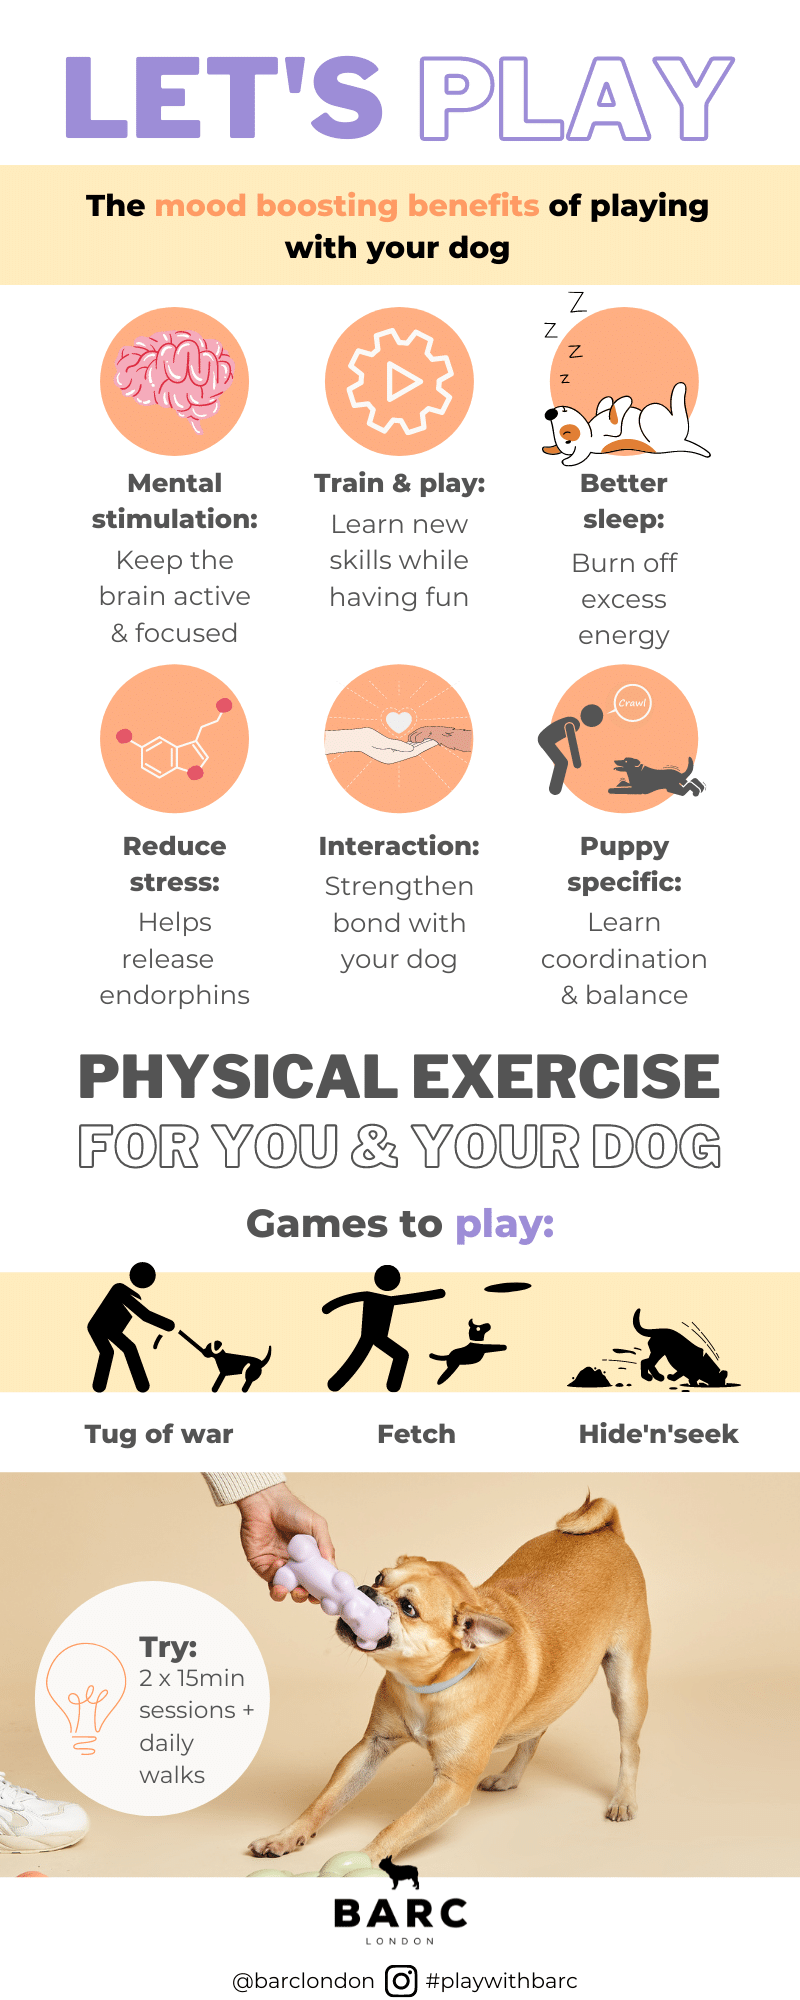 https://cdn.shopify.com/s/files/1/0071/8946/3091/files/The_mood_boosting_benefits_of_playing_with_your_dog.png?v=1650984571